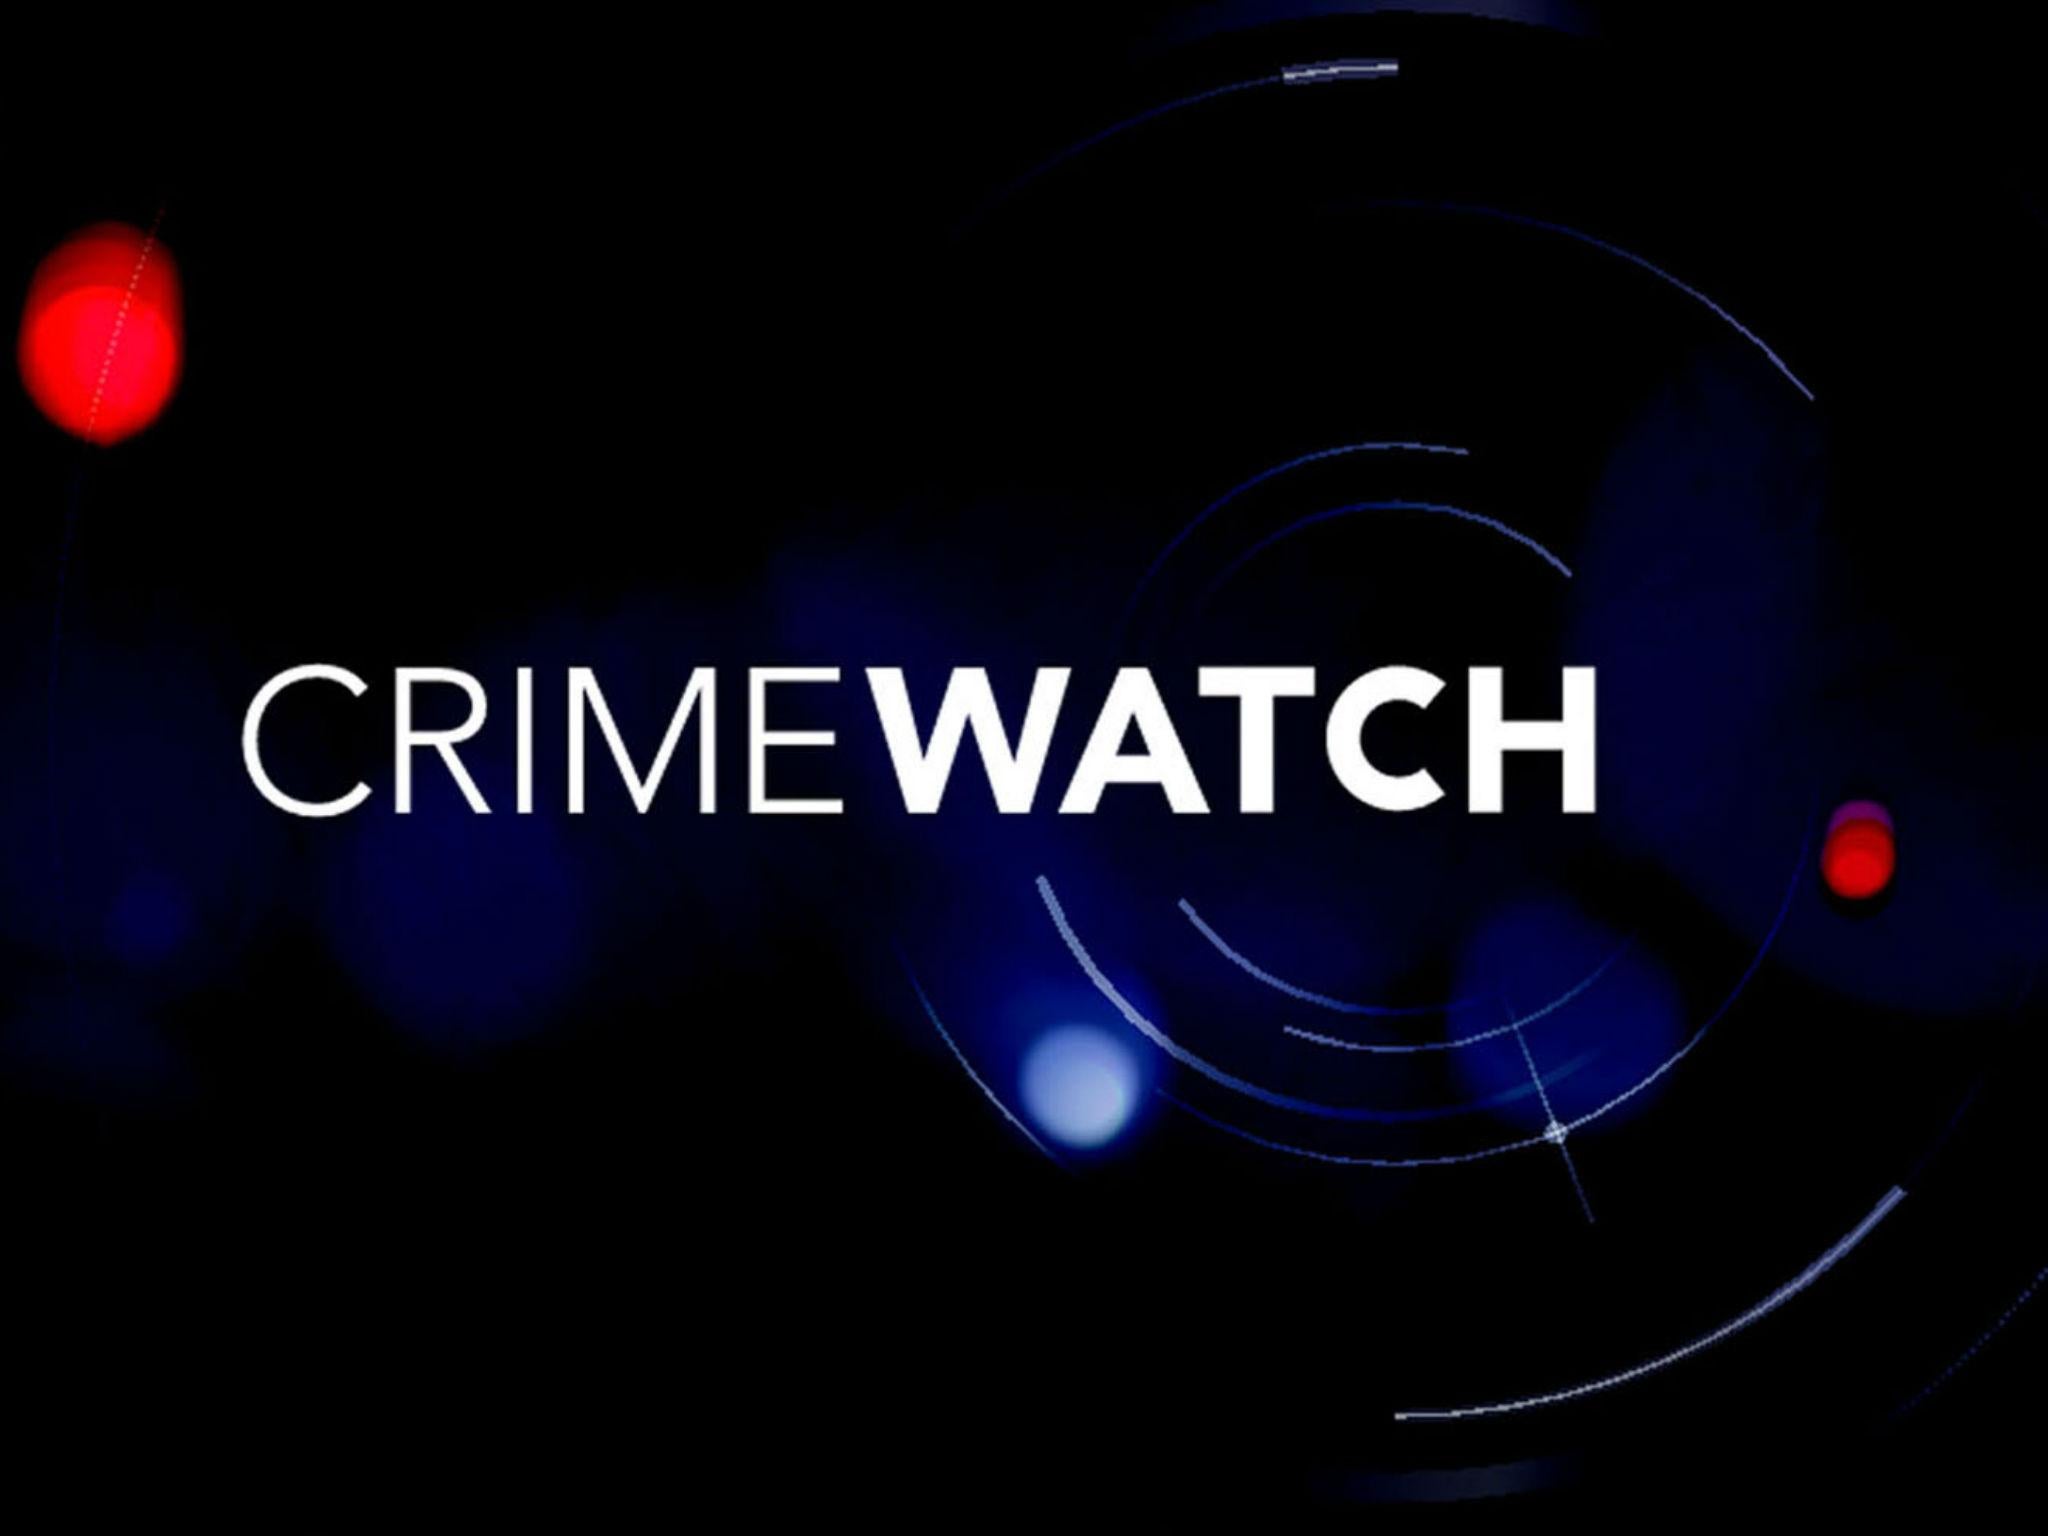 Crimewatch under fire after using girl's murder as 'disgusting